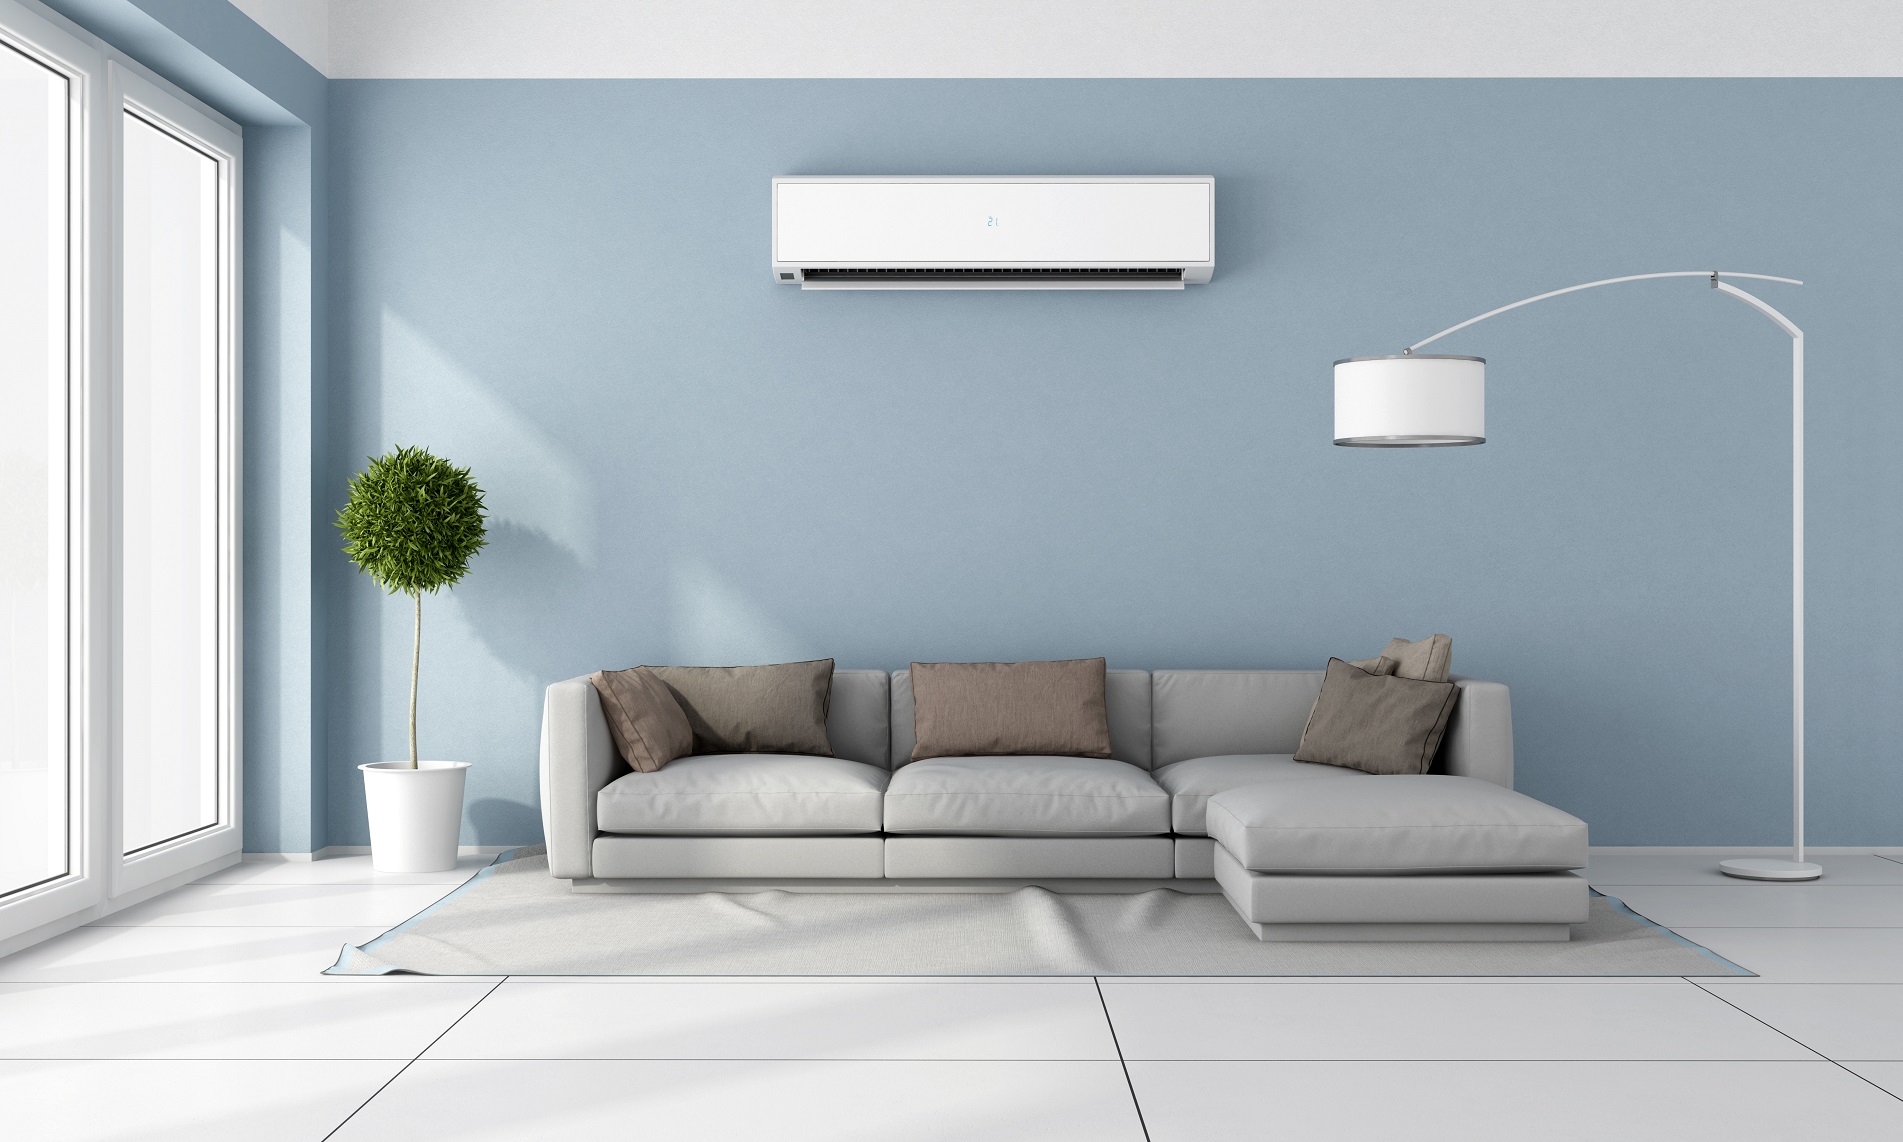 Blue Living Room With Gray Sofa And Air Conditioner On Wall 3d Rendering